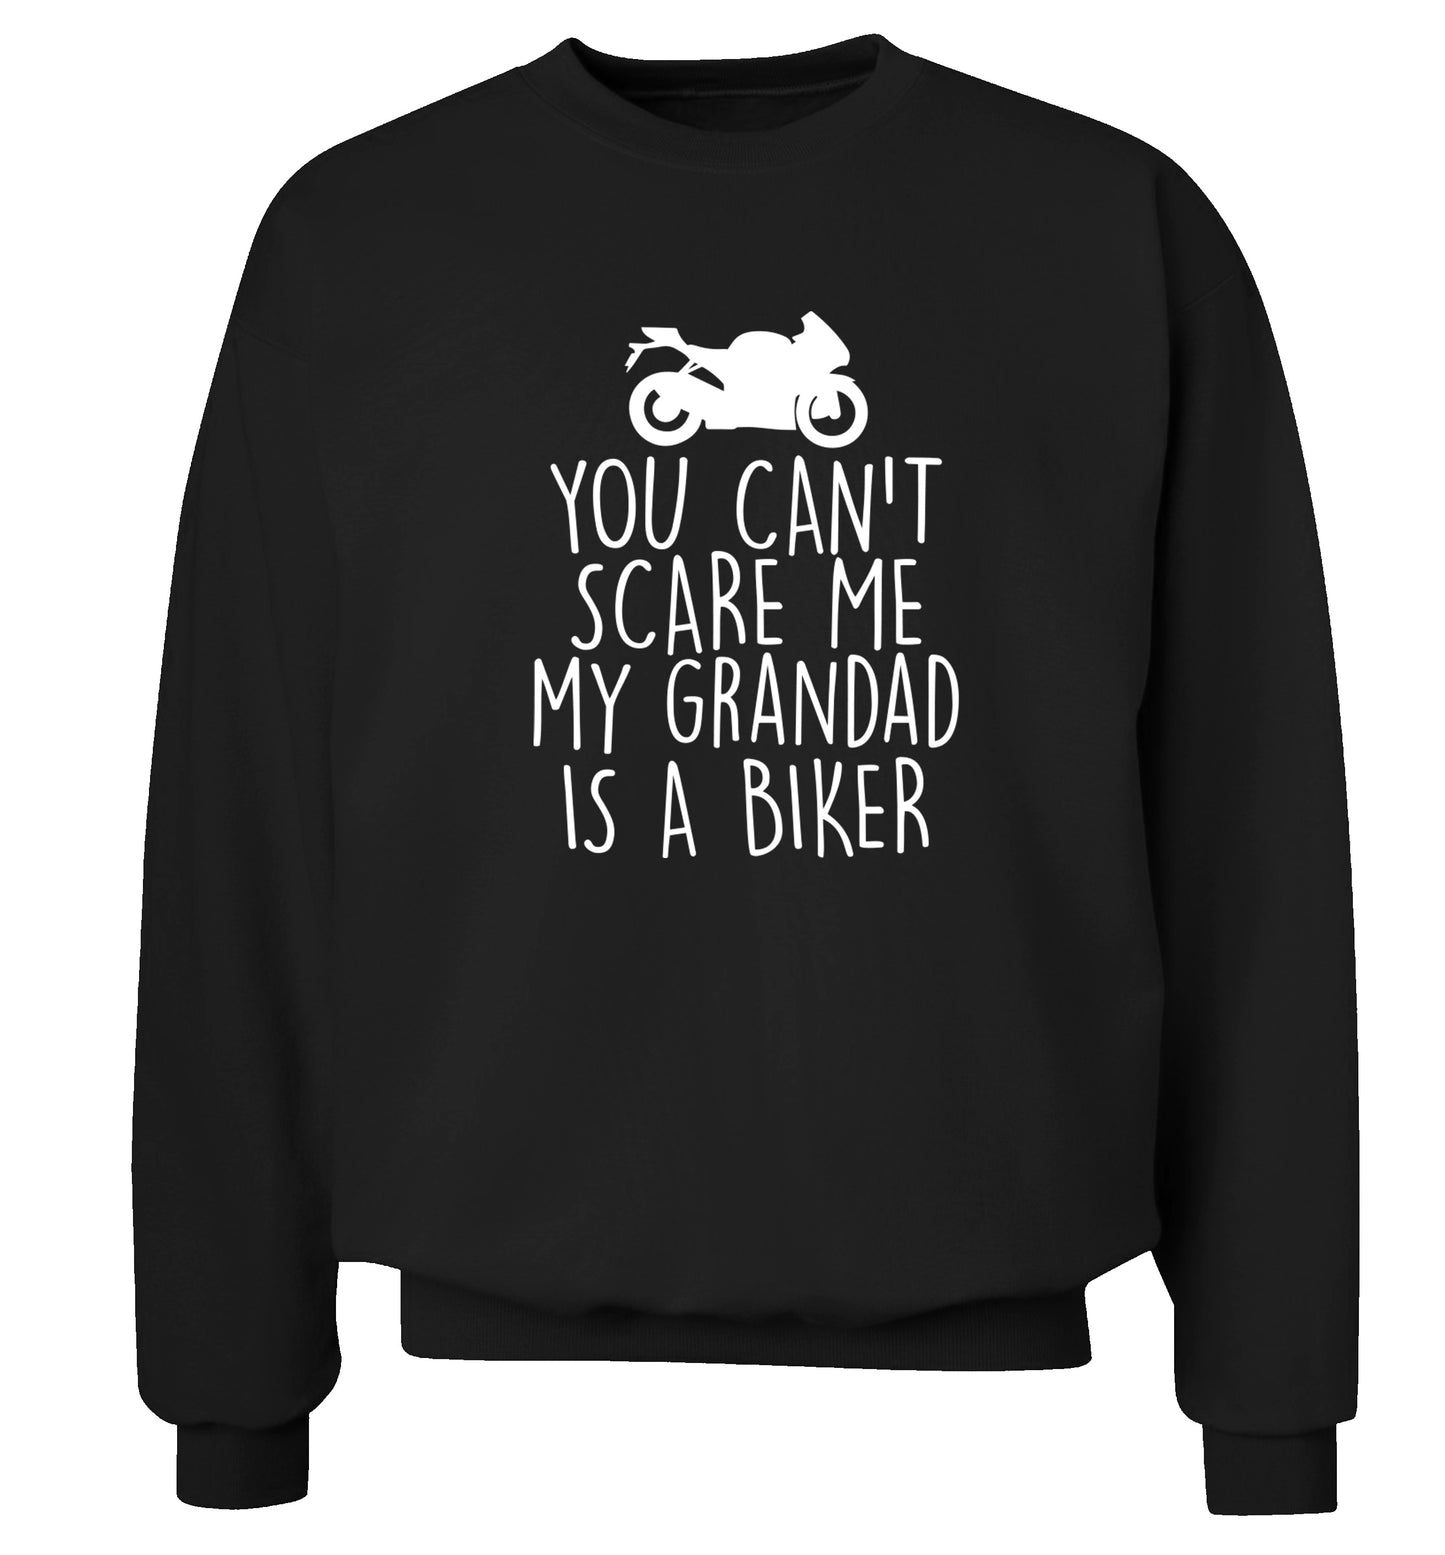 You can't scare me my grandad is a biker Adult's unisex black Sweater 2XL